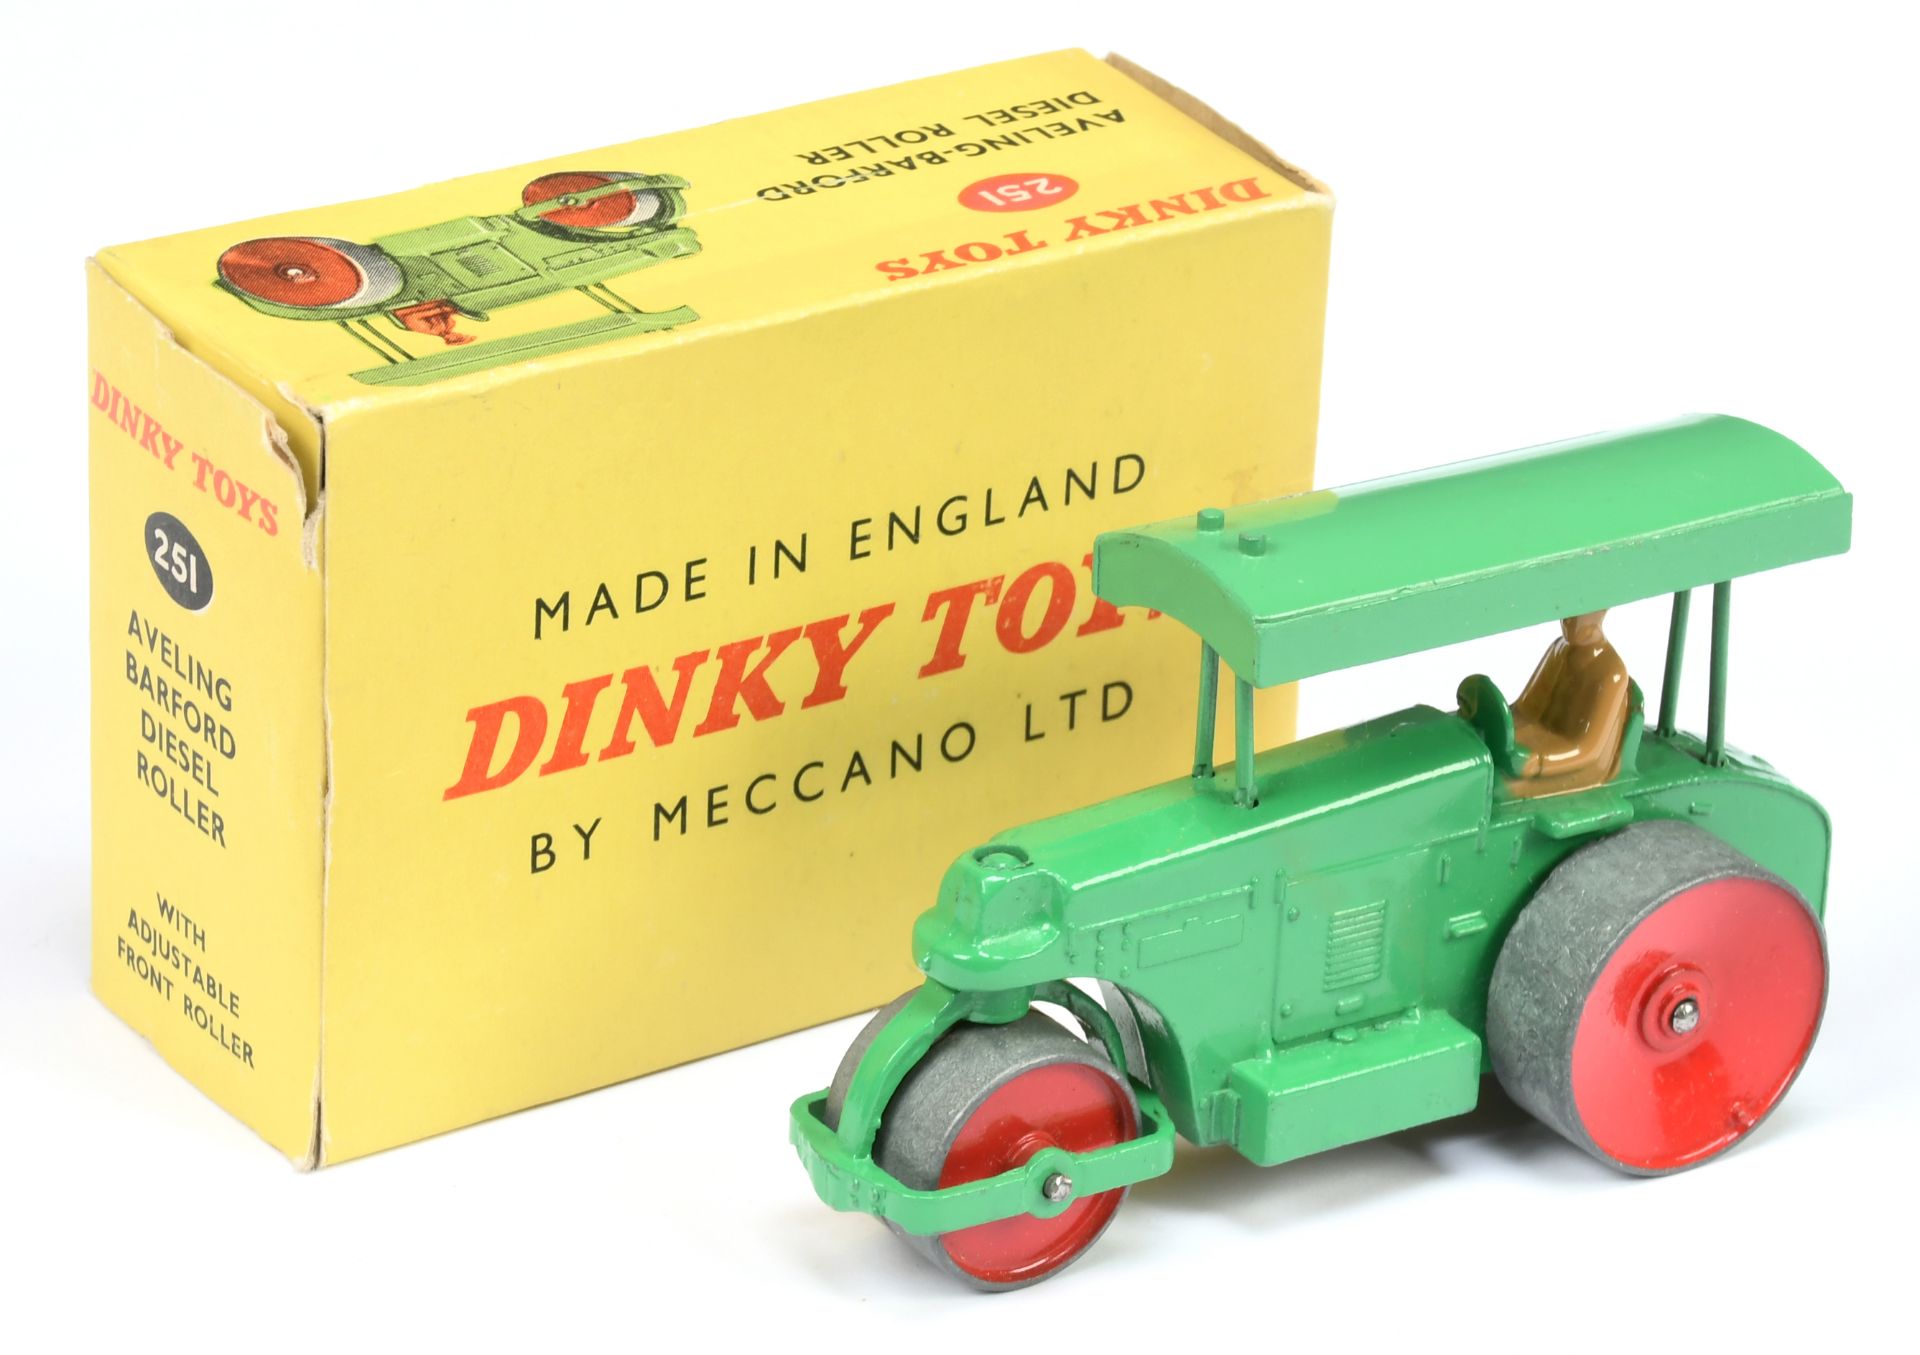 Dinky Toys 251 Aveling Barford Road Roller - Mid-green body and canopy, red metal wheels, tan fig...